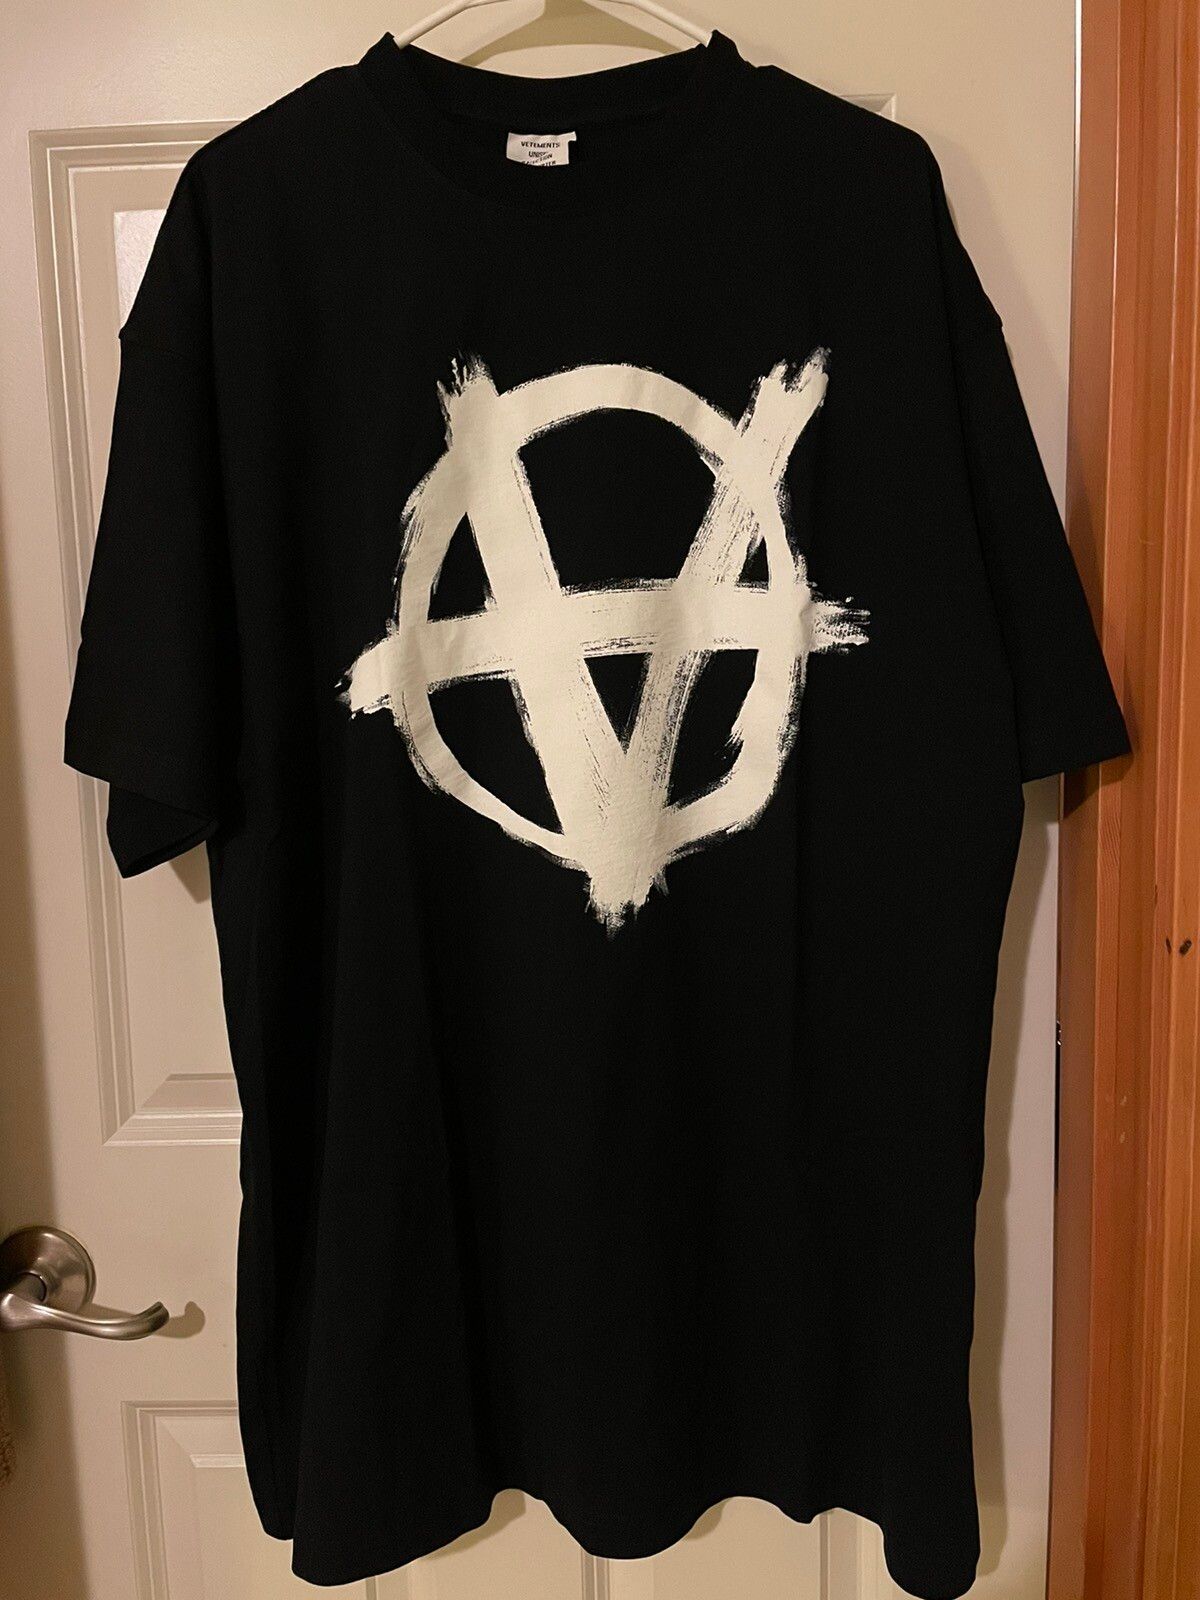 Vetements Vetemens Limited Edition Anarchy Oversized T-Shirt | Grailed